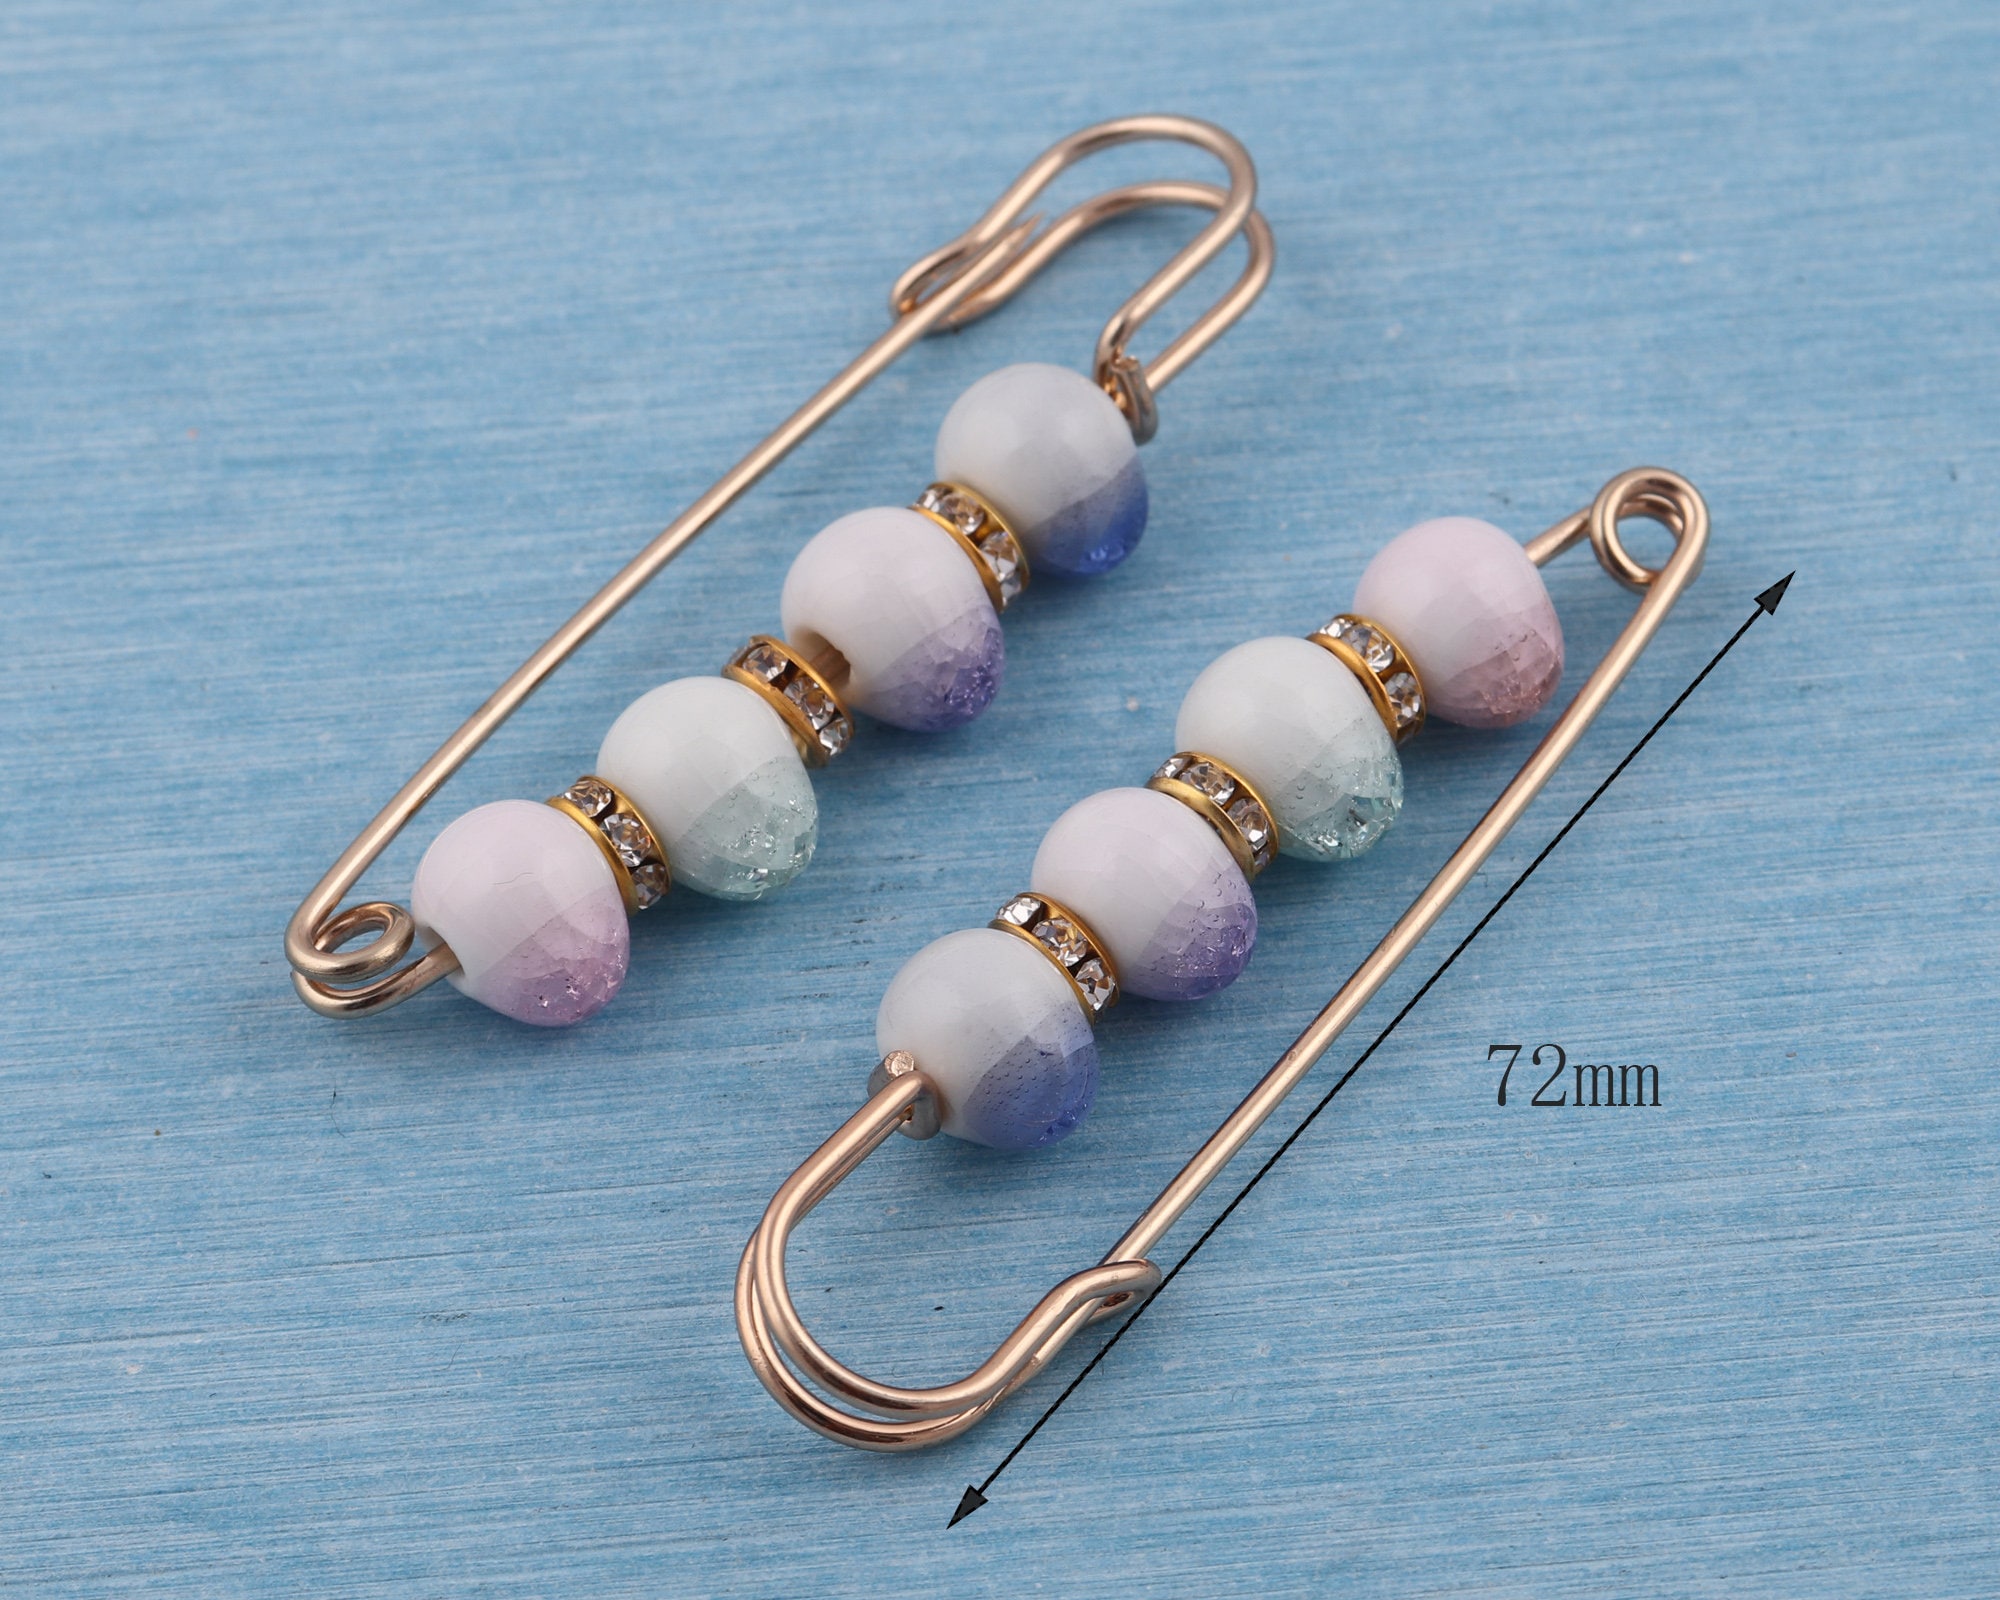 2-4-10pcs Beads Safety Pins1572mm Brooch Safety Pins With 